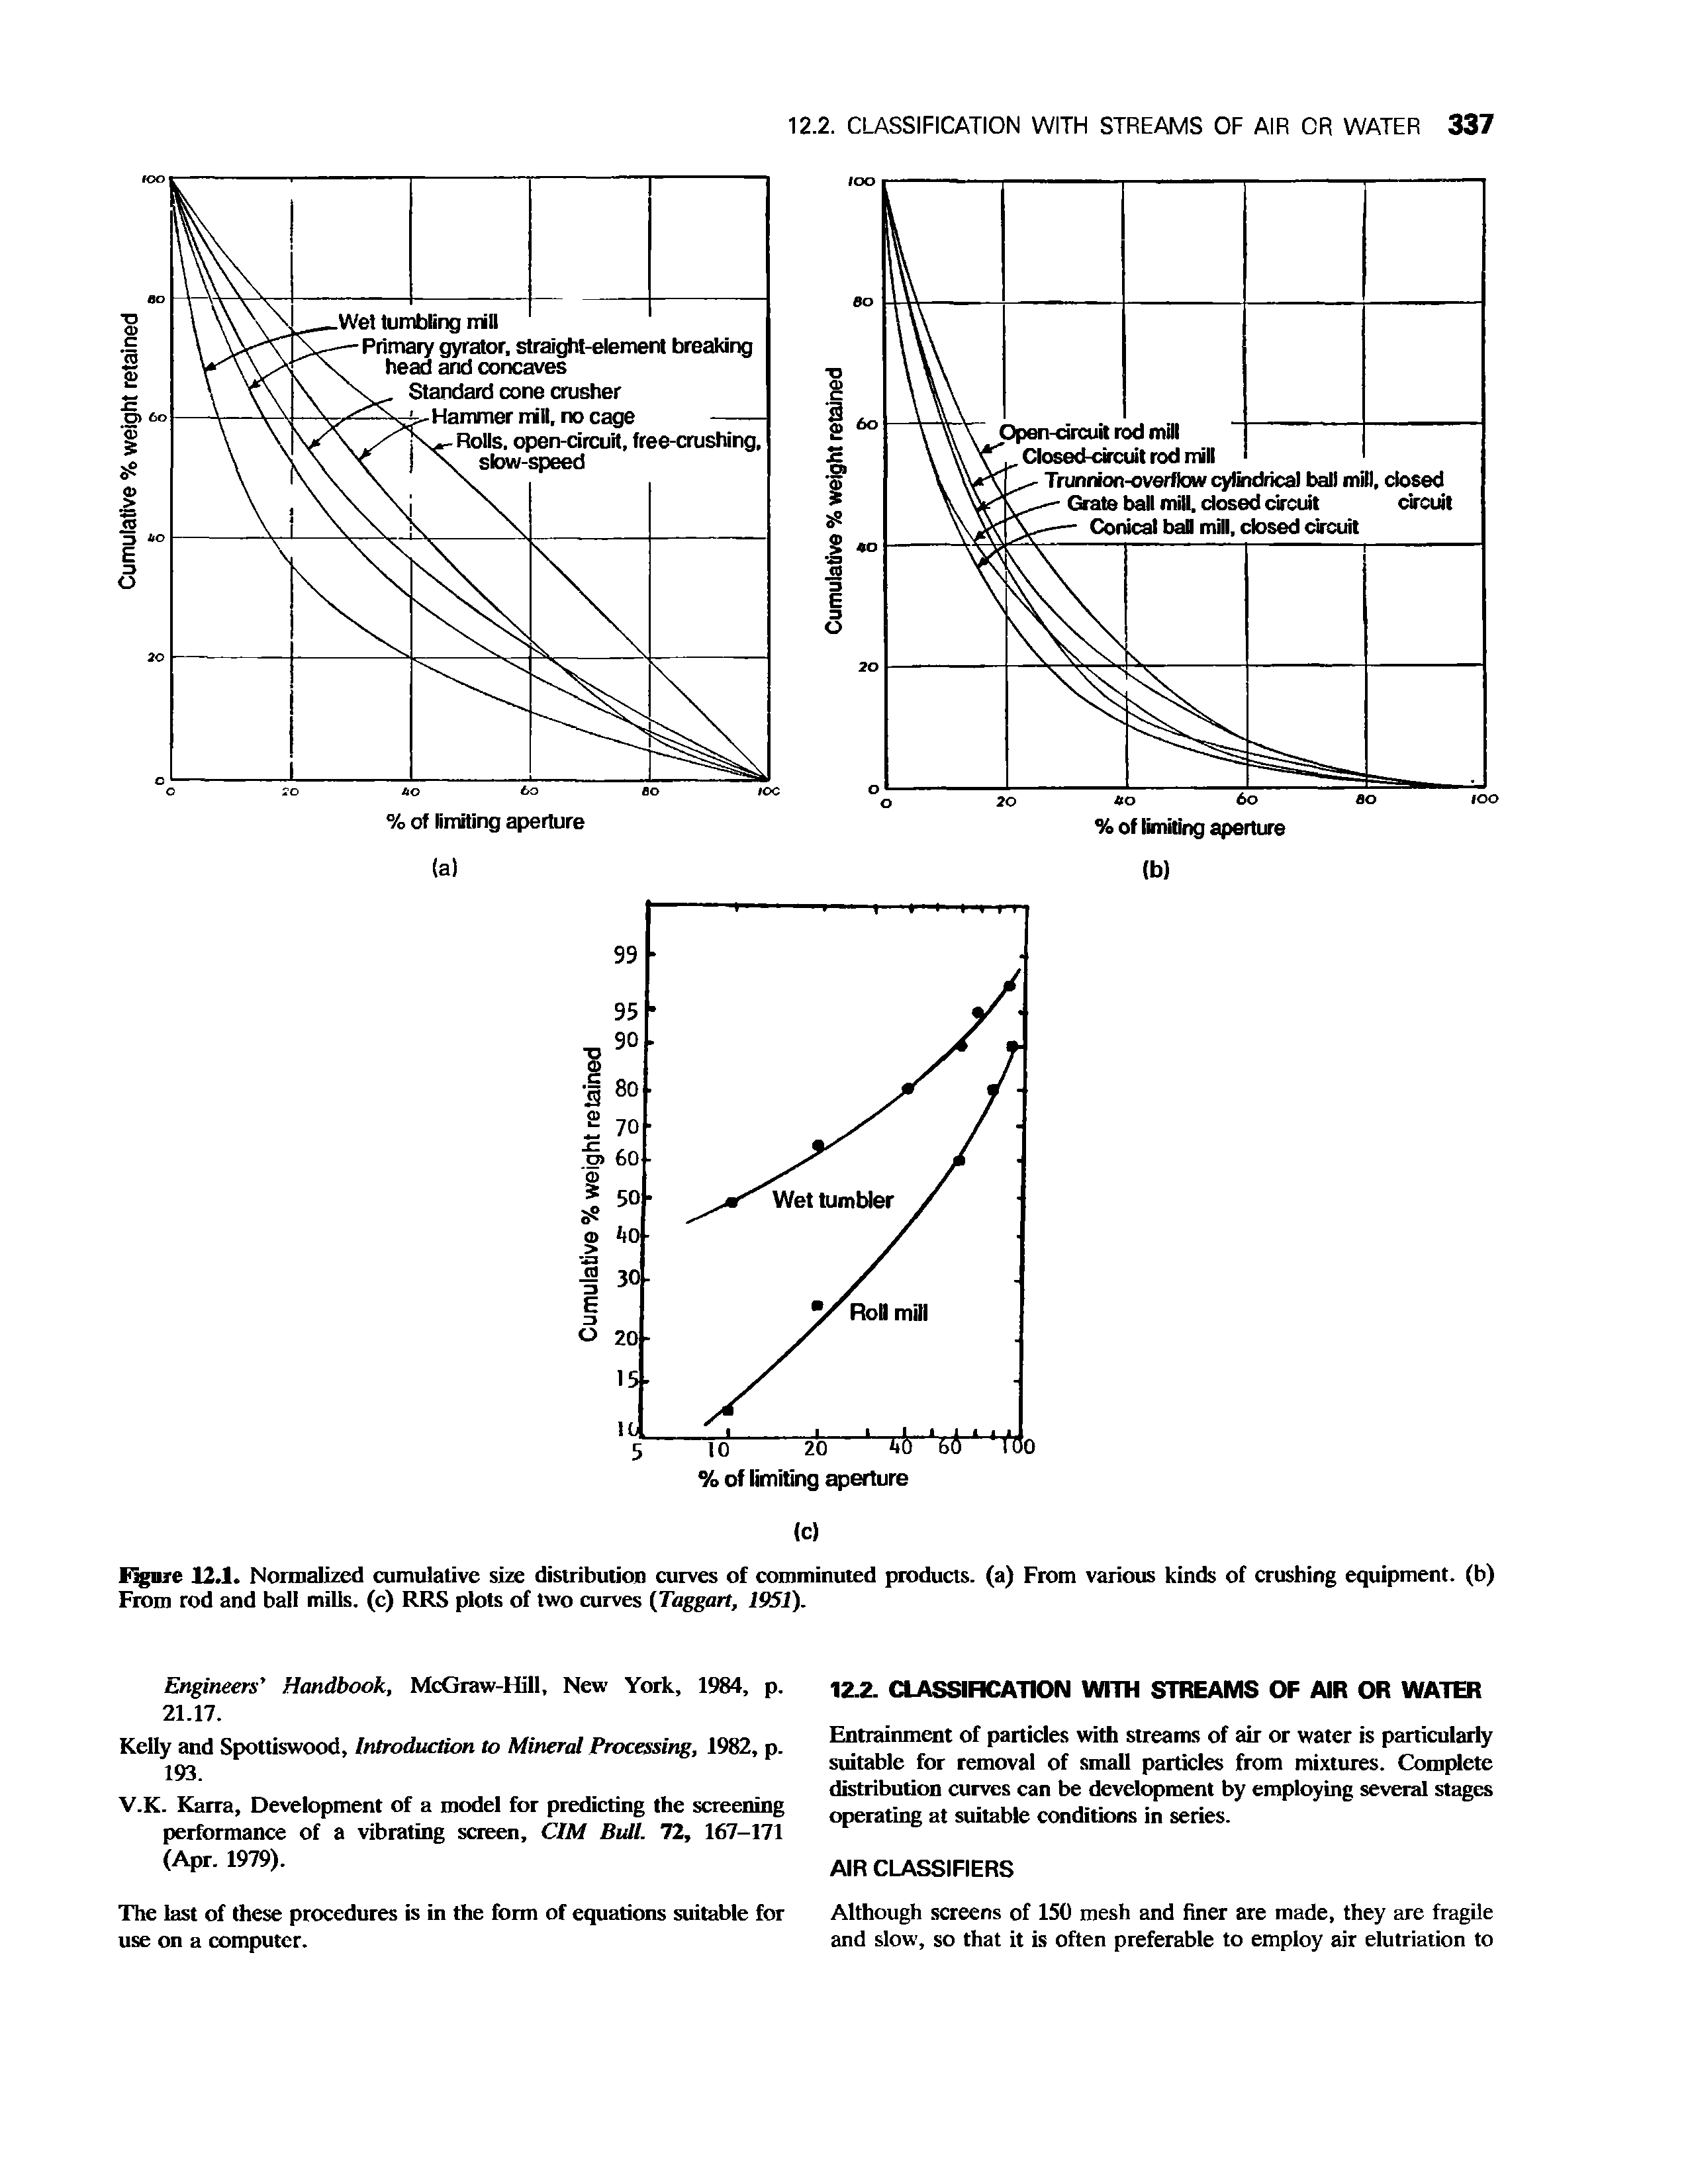 Figure 12.1. Normalized cumulative size distribution curves of comminuted products, (a) From various kinds of crushing equipment, (b) From rod and ball mills, (c) RRS plots of two curves Taggart, 1951).